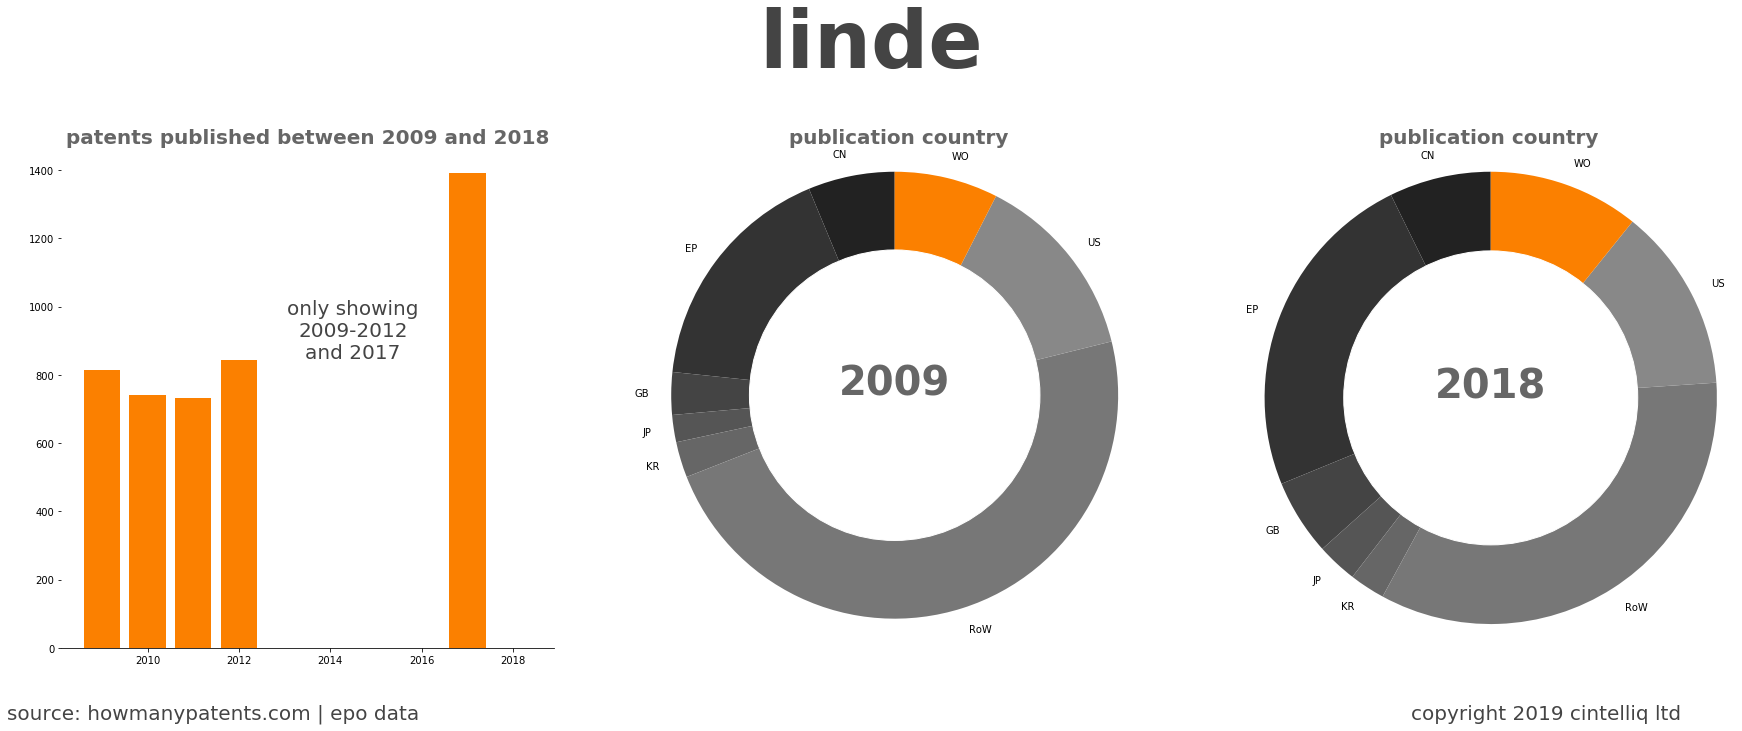 summary of patents for Linde